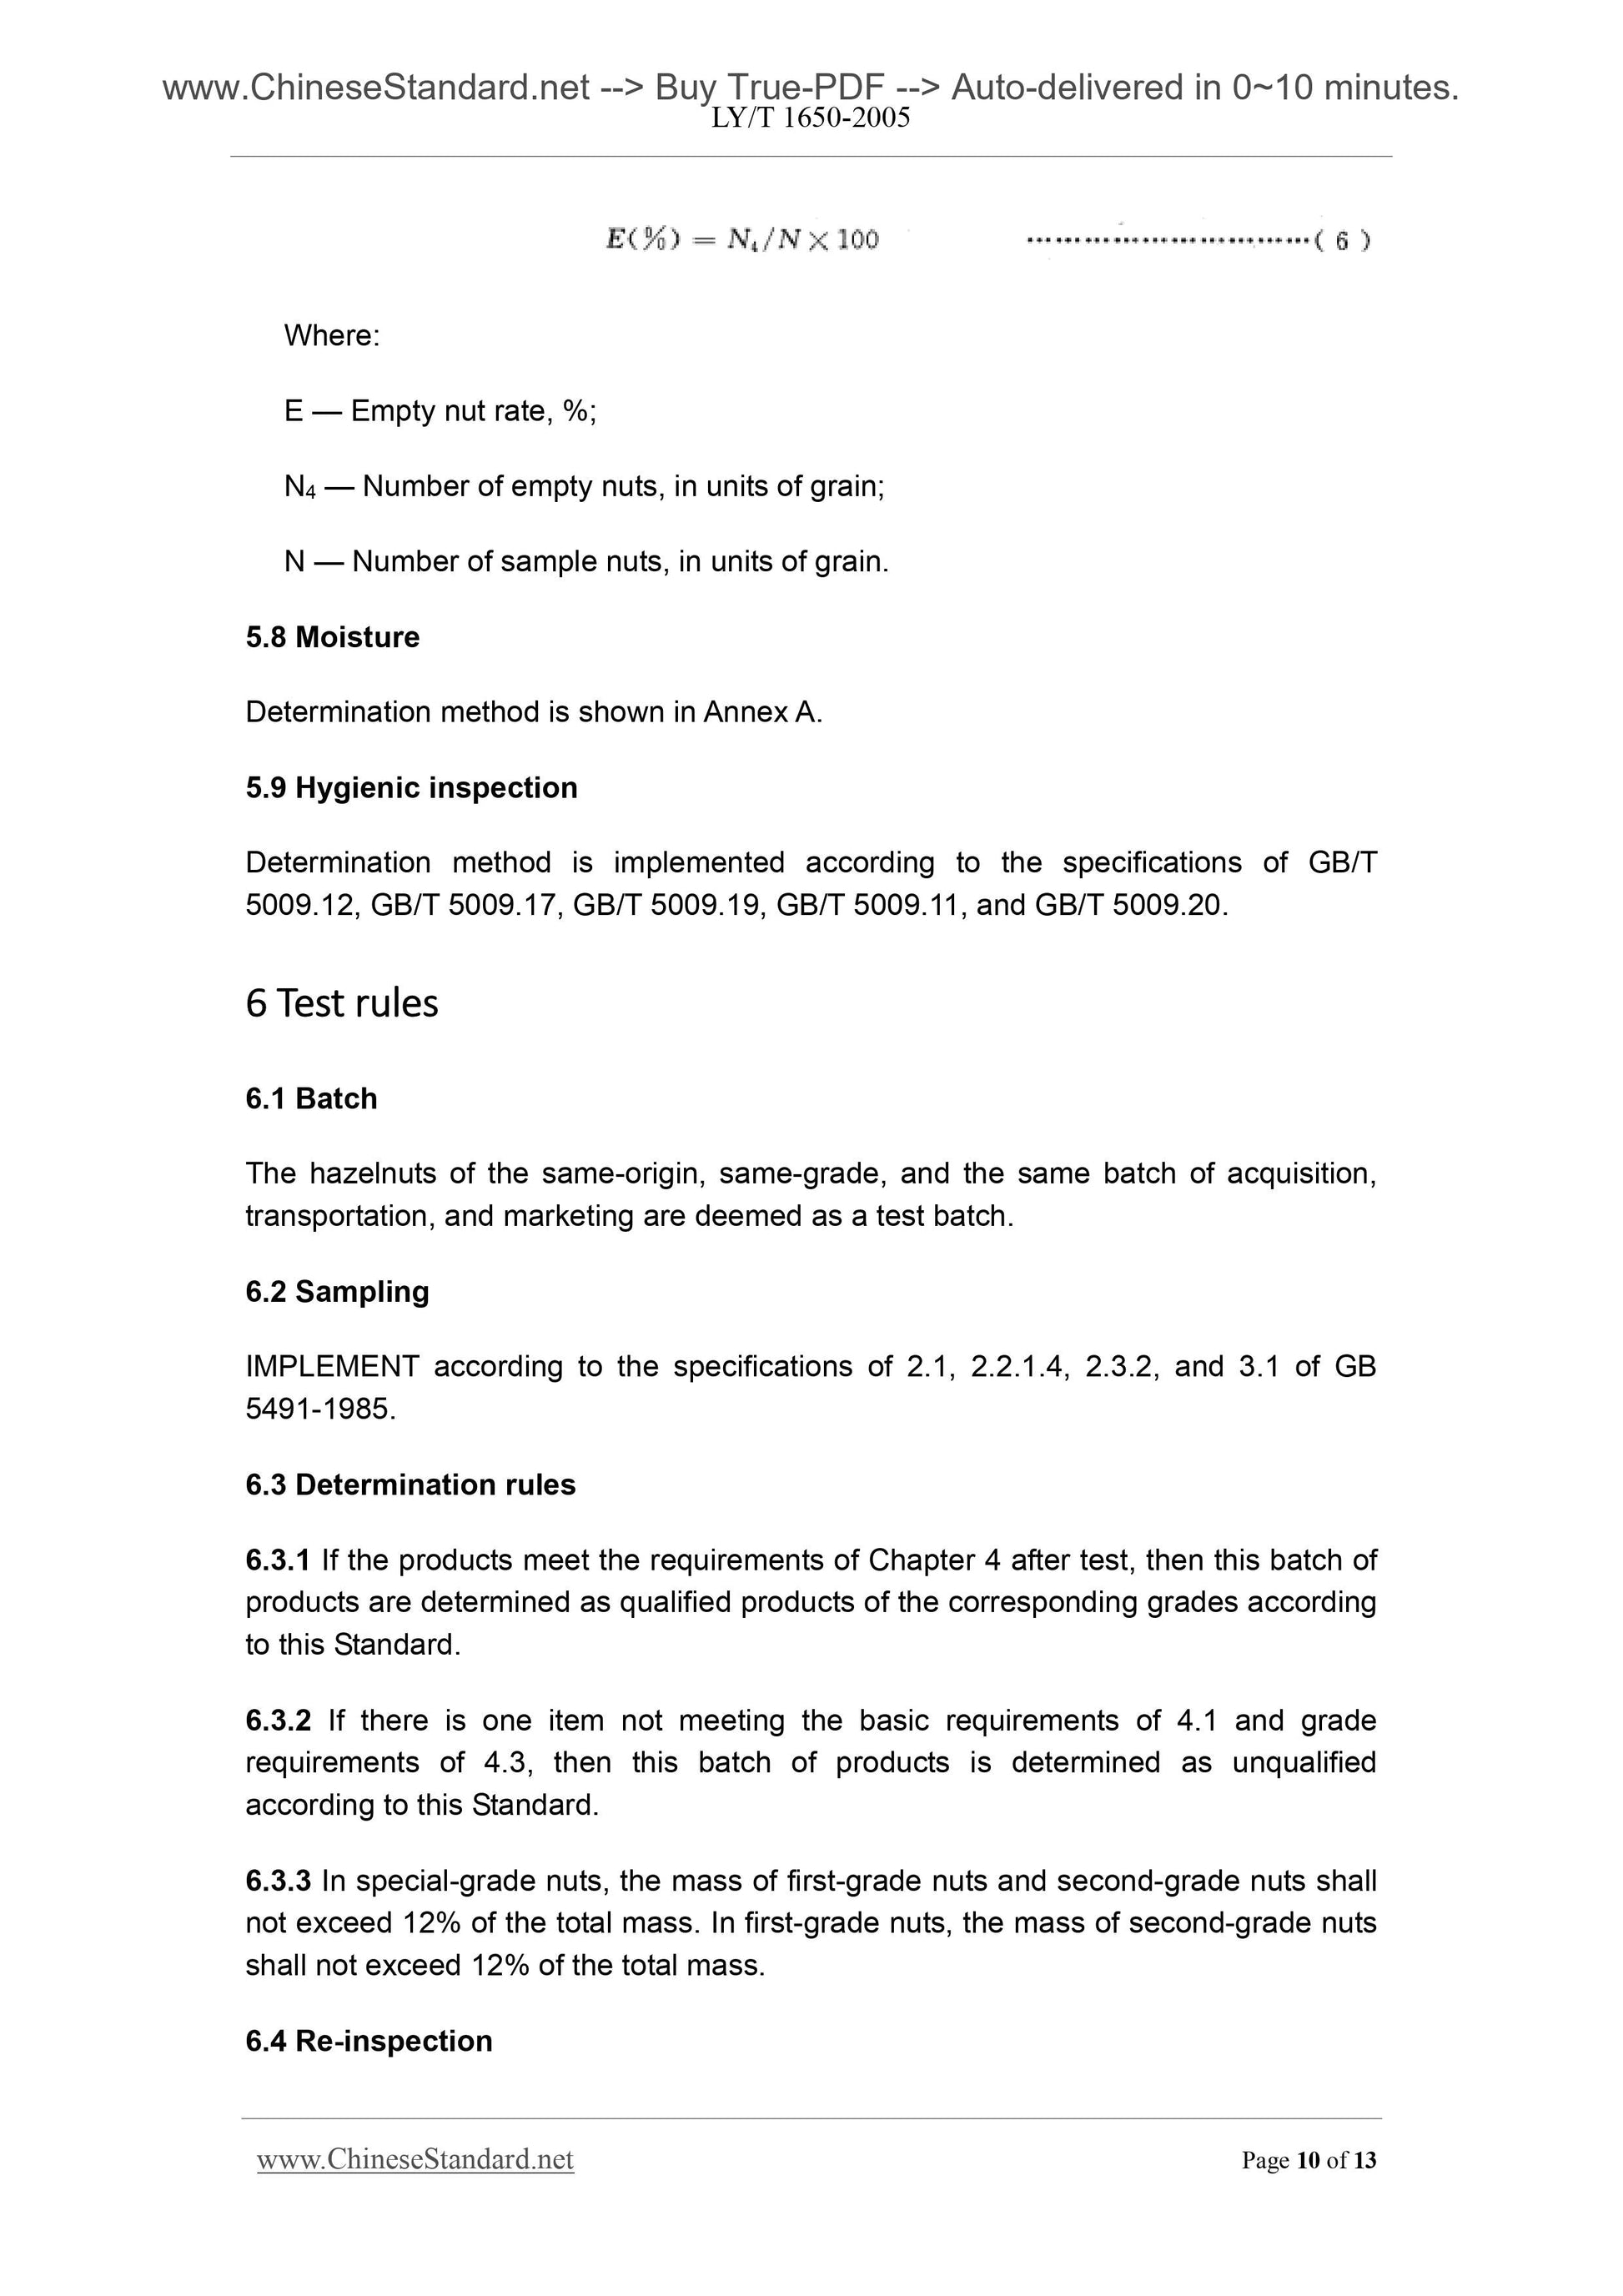 LY/T 1650-2005 Page 6